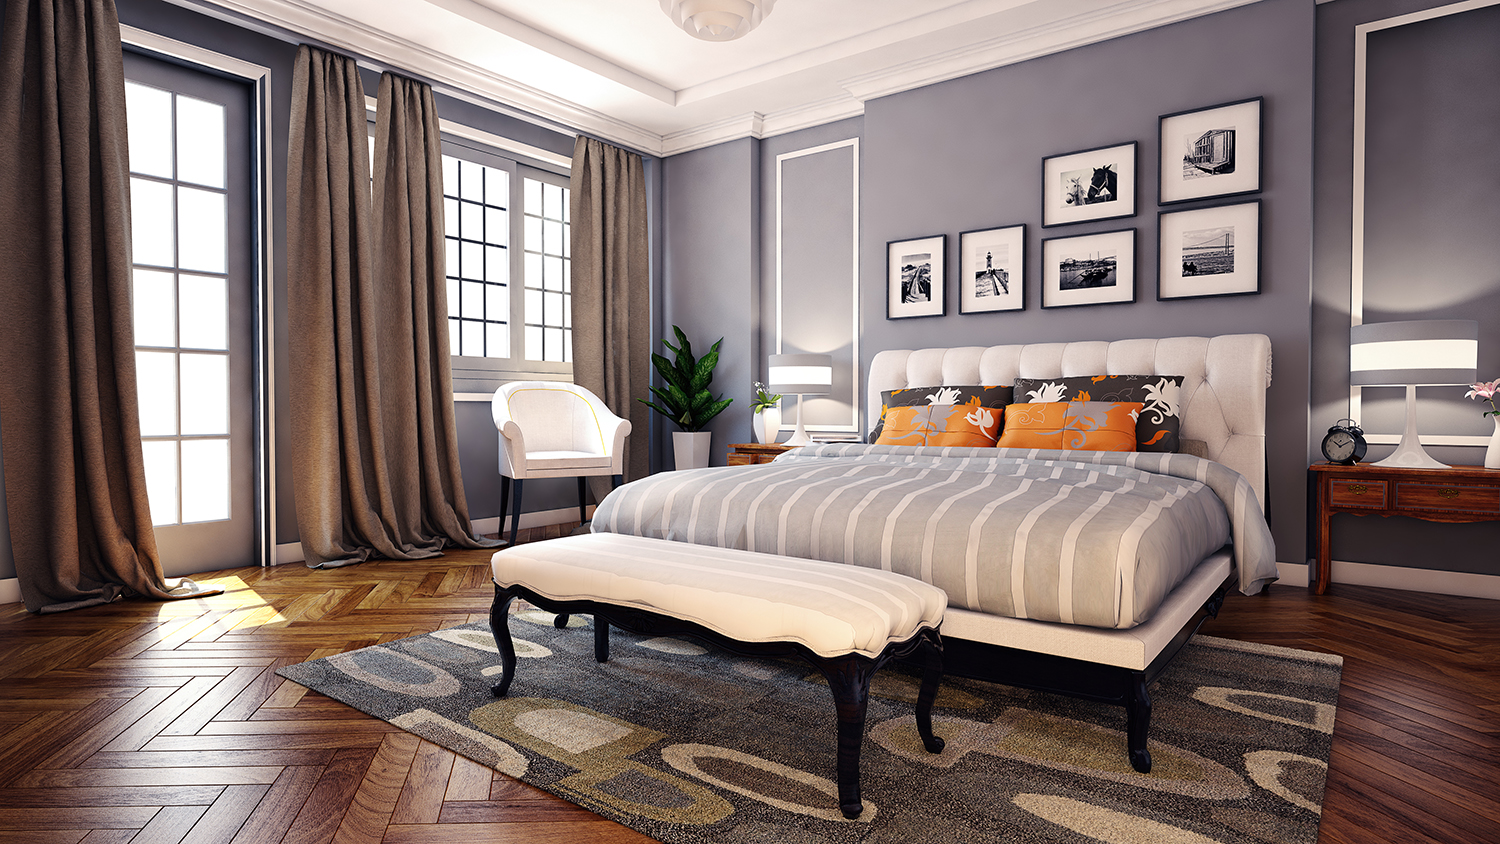 average cost of bedroom remodeling with new furniture